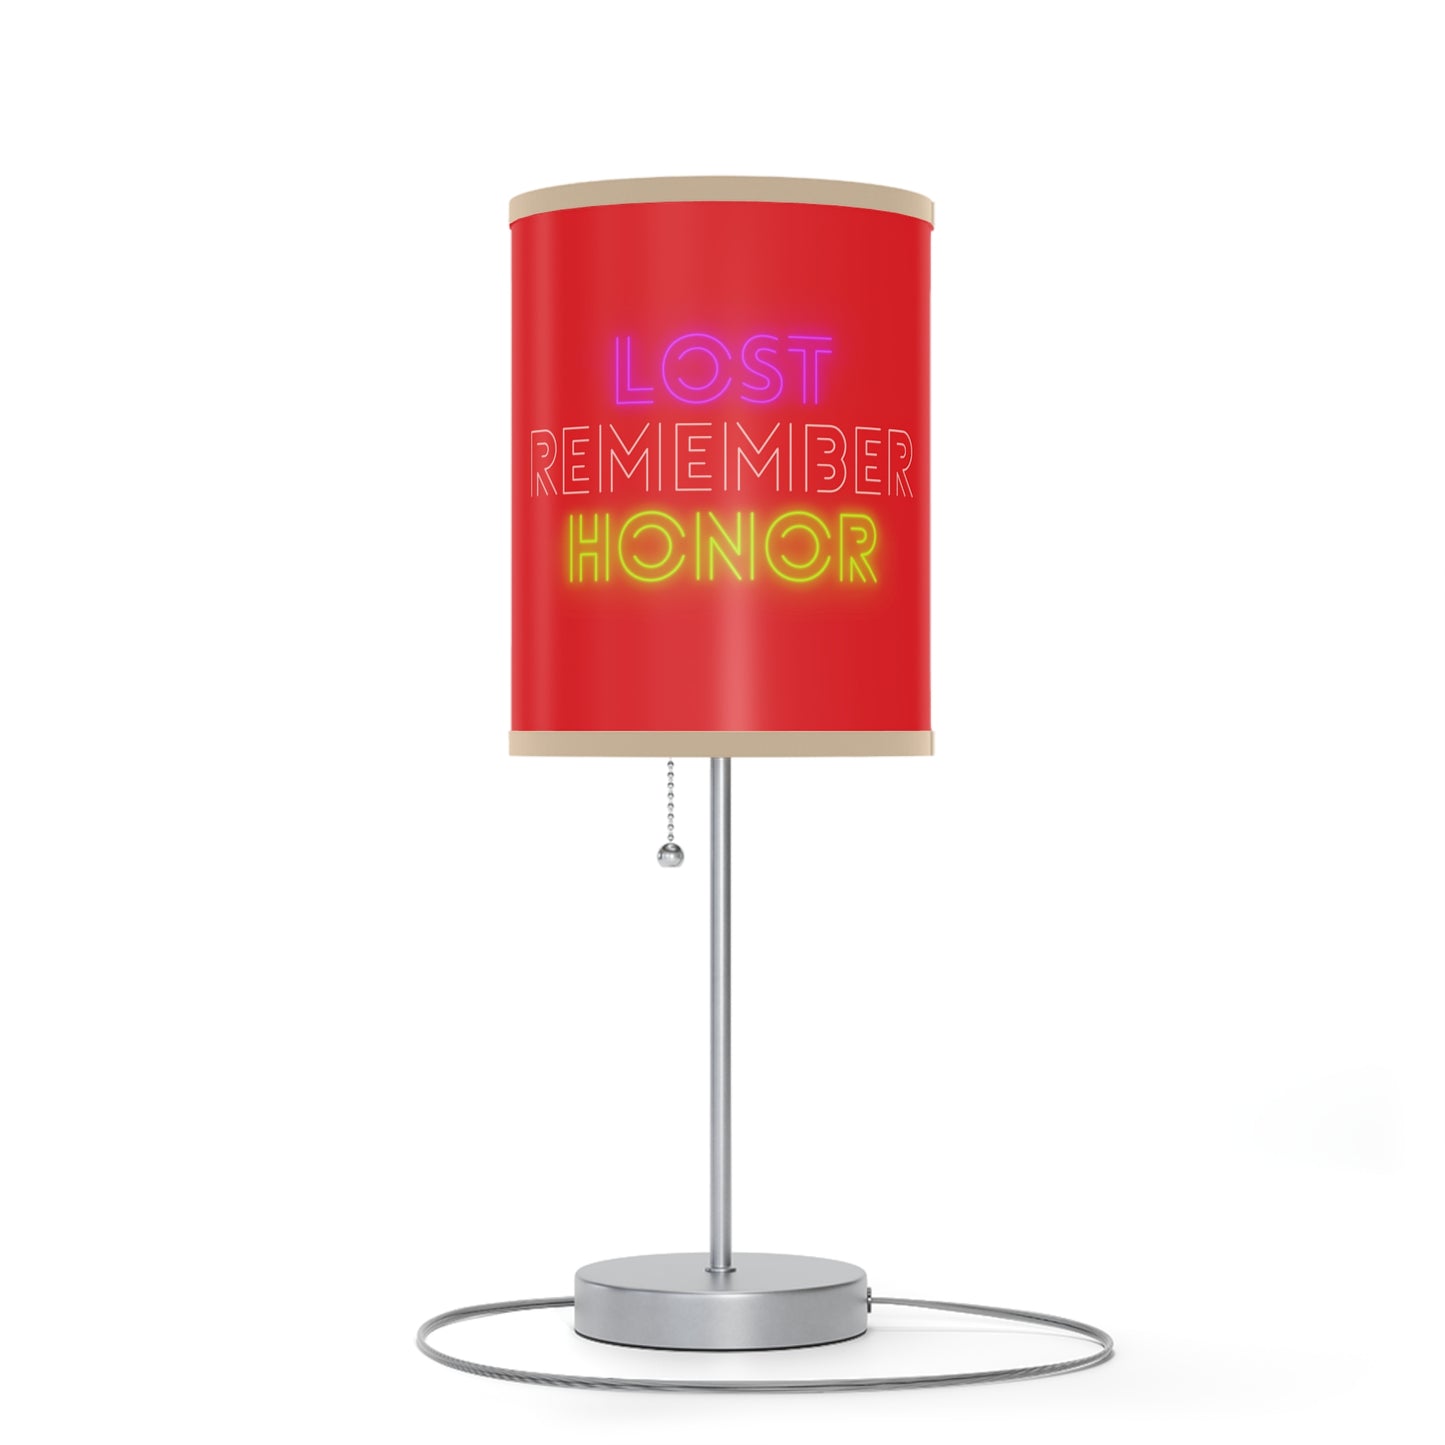 Lamp on a Stand, US|CA plug: Wolves Red